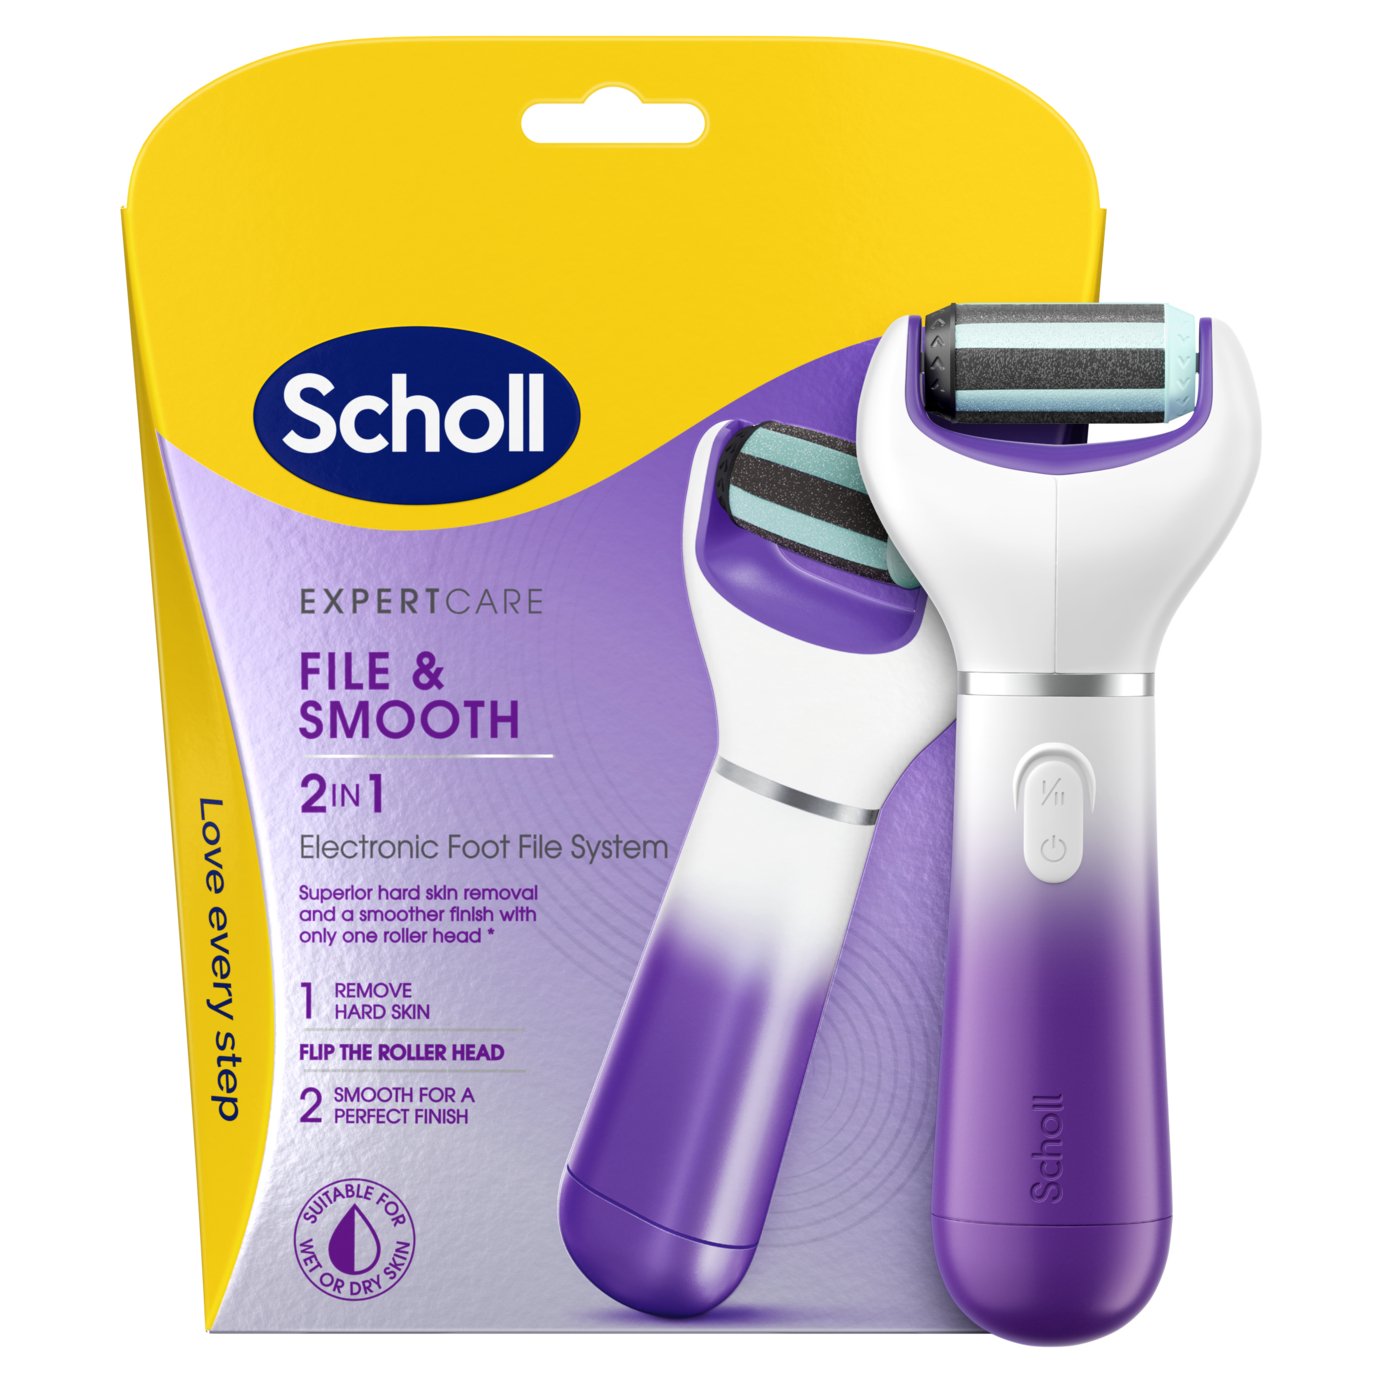 Scholl Velvet Smooth 2-in-1 Electric Foot File